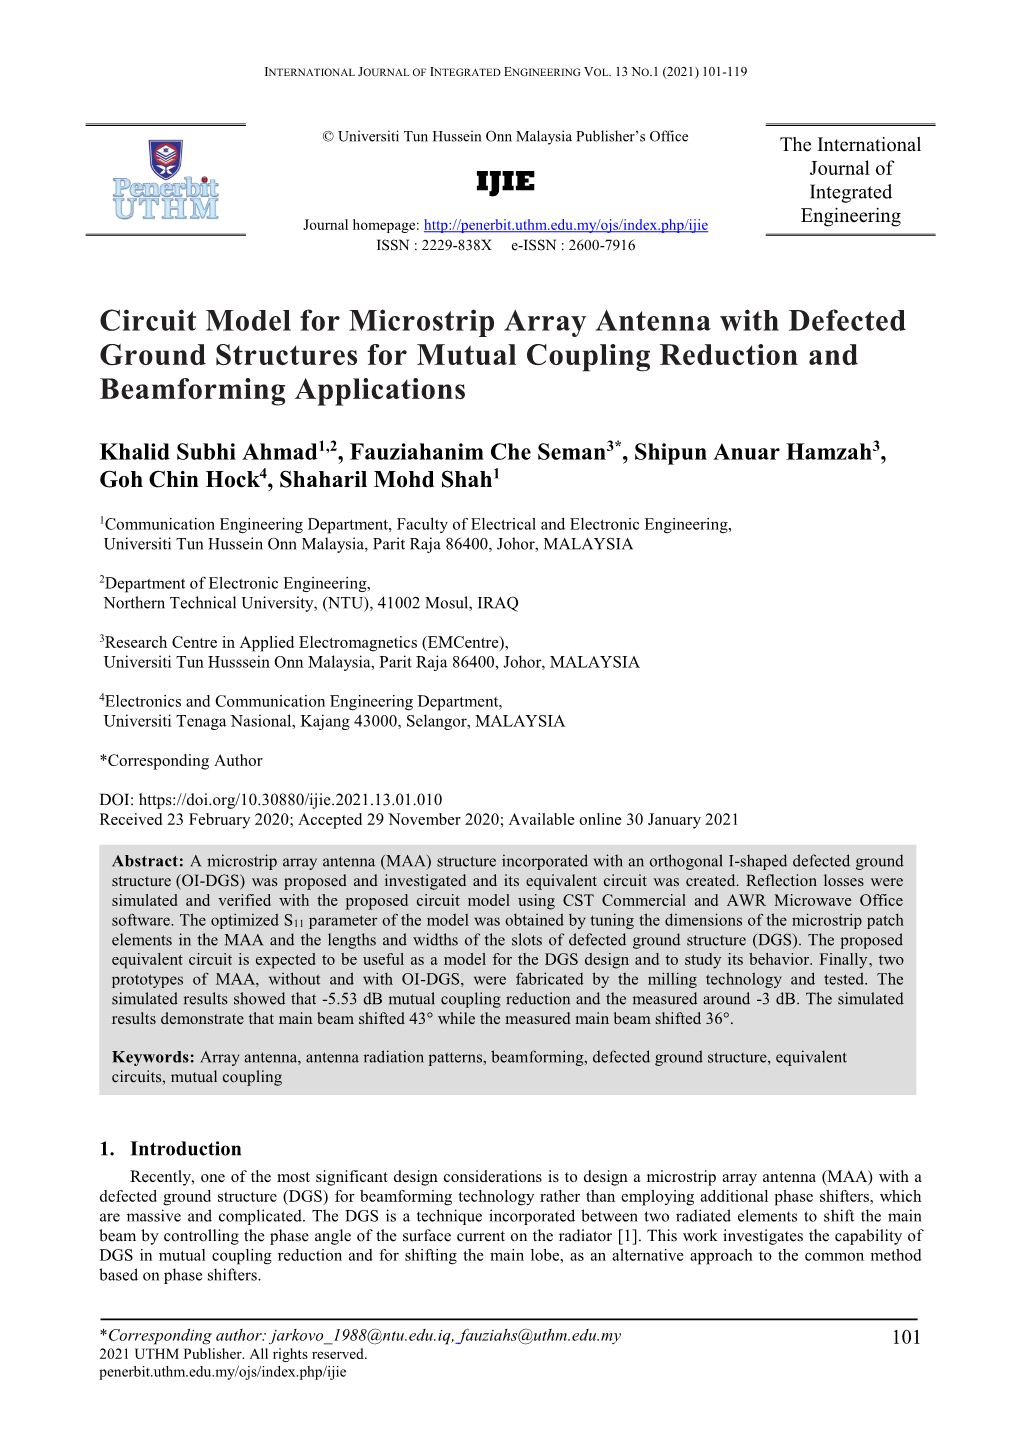 Circuit Model for Microstrip Array Antenna with Defected Ground Structures for Mutual Coupling Reduction and Beamforming Applications